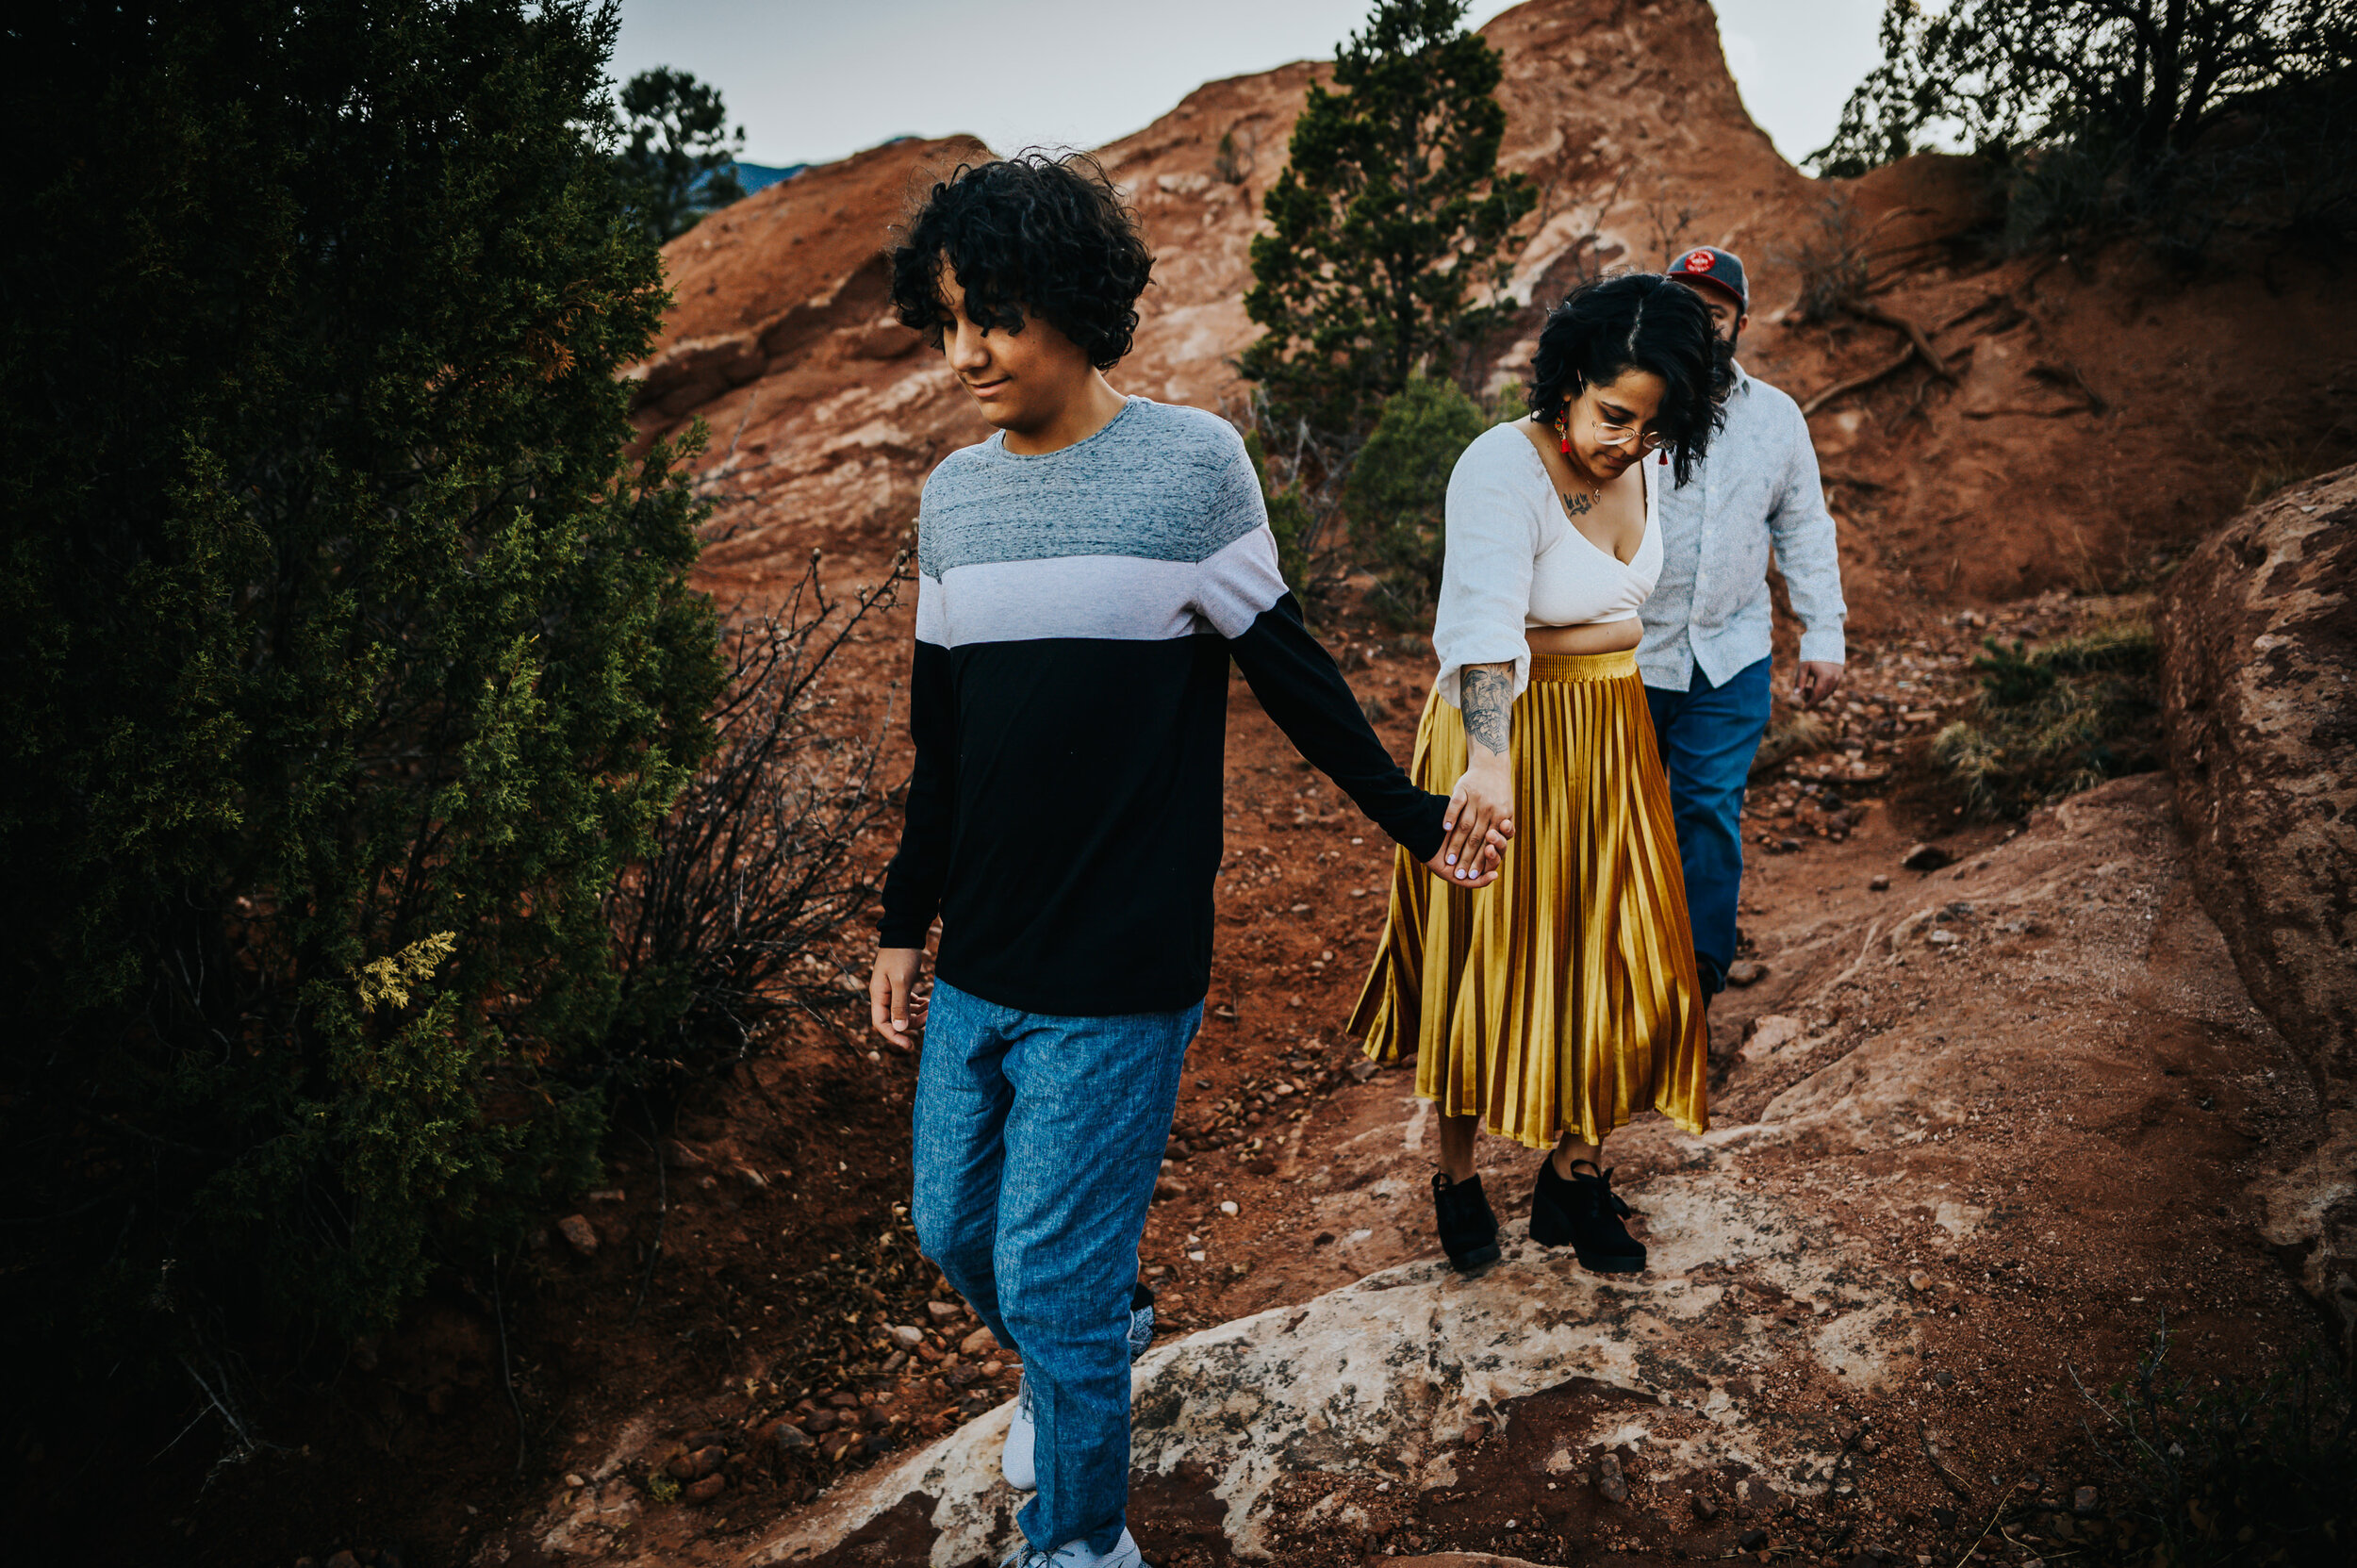 Caroline and Tommy Engagement Session Colorado Springs Colorado Garden of the Gods Wild Prairie Photography-4-2021.jpg